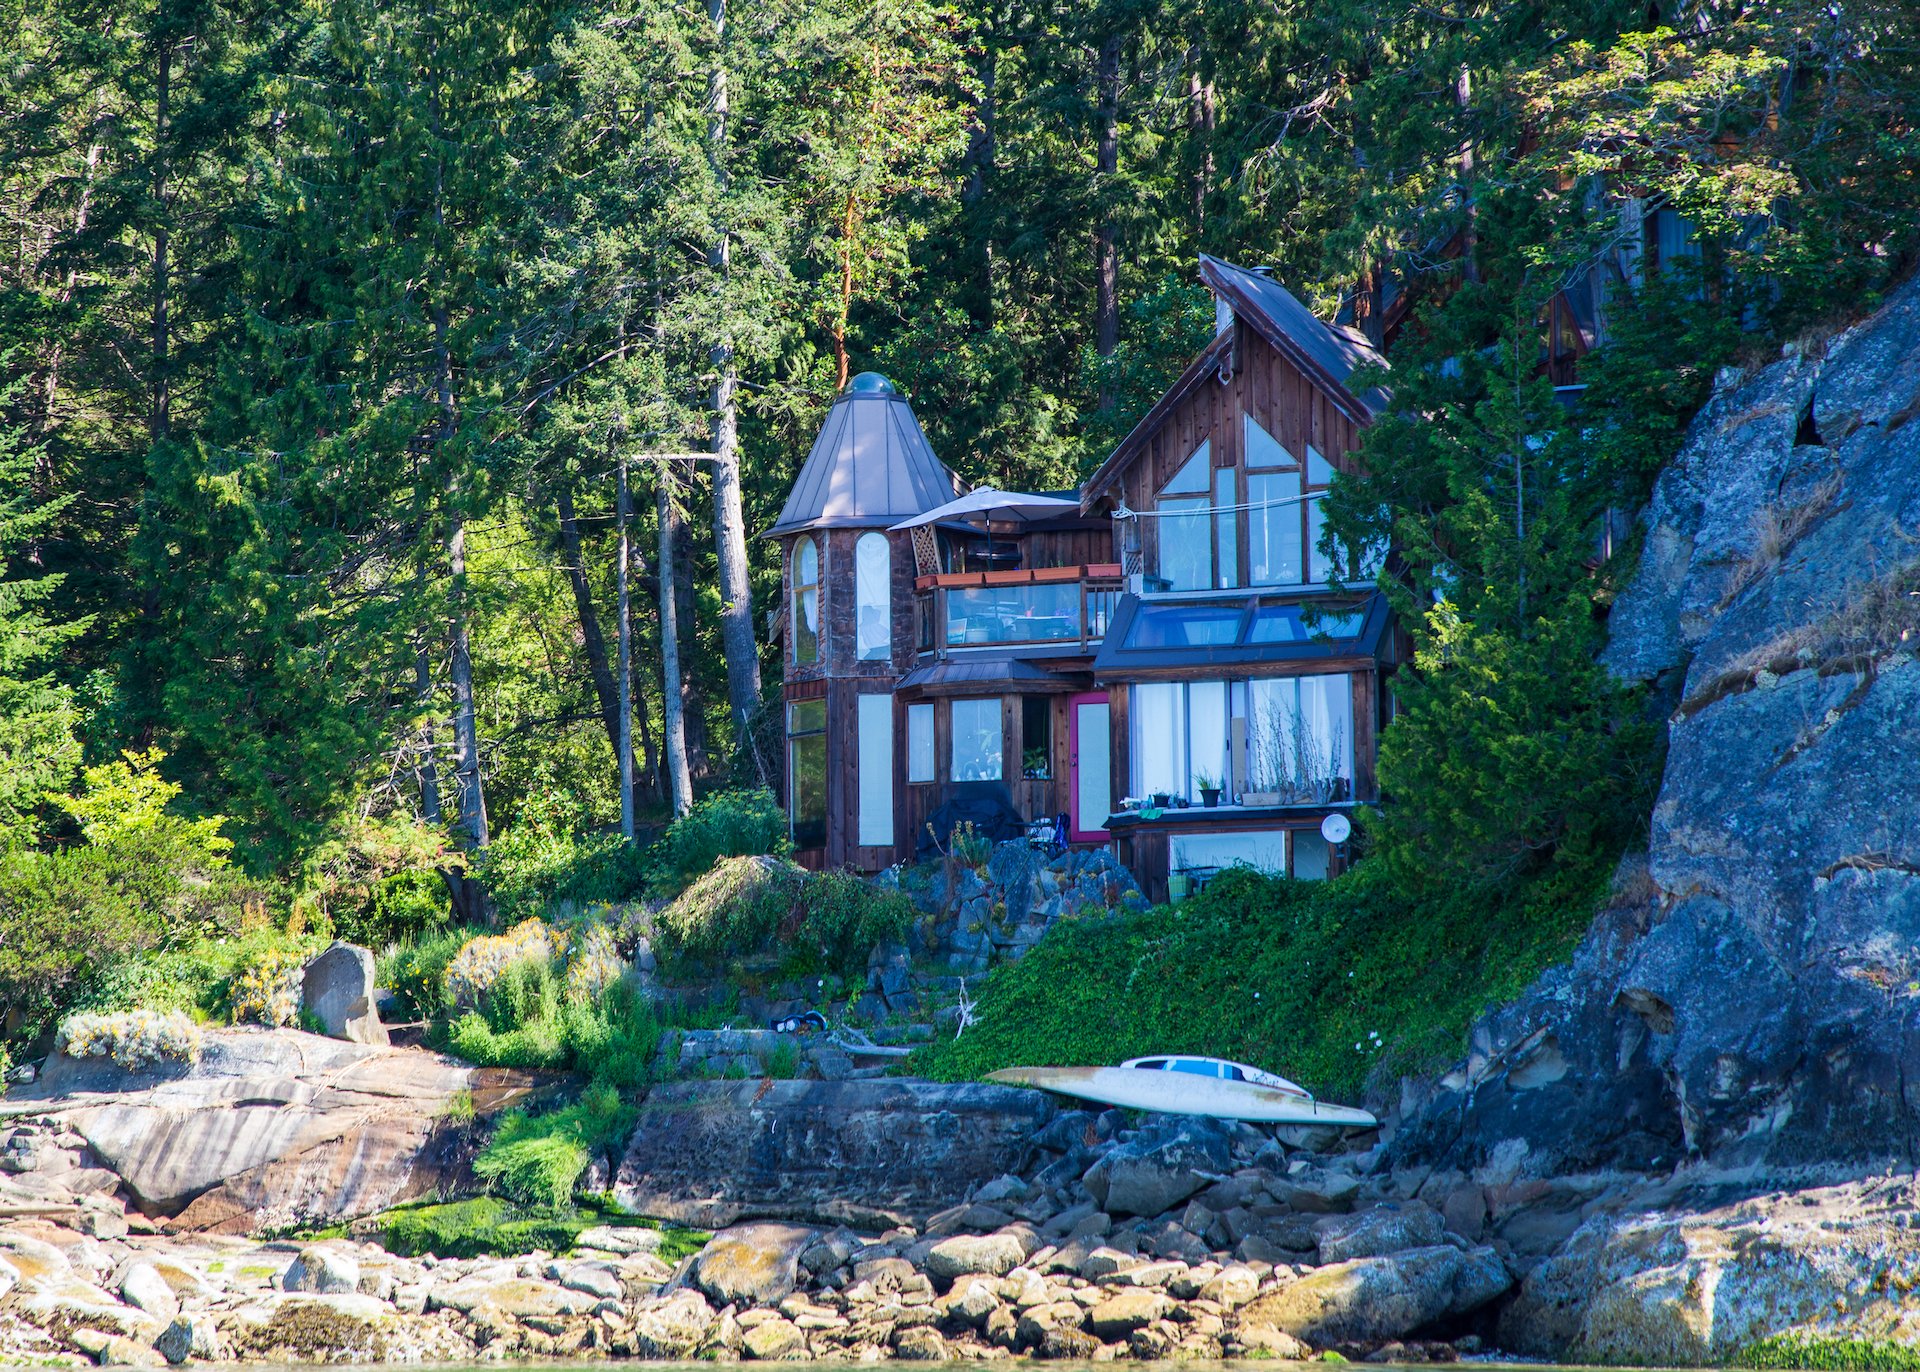  This is the cool house we’ve seen from shore a number of times over the years. It’s a great spot. 